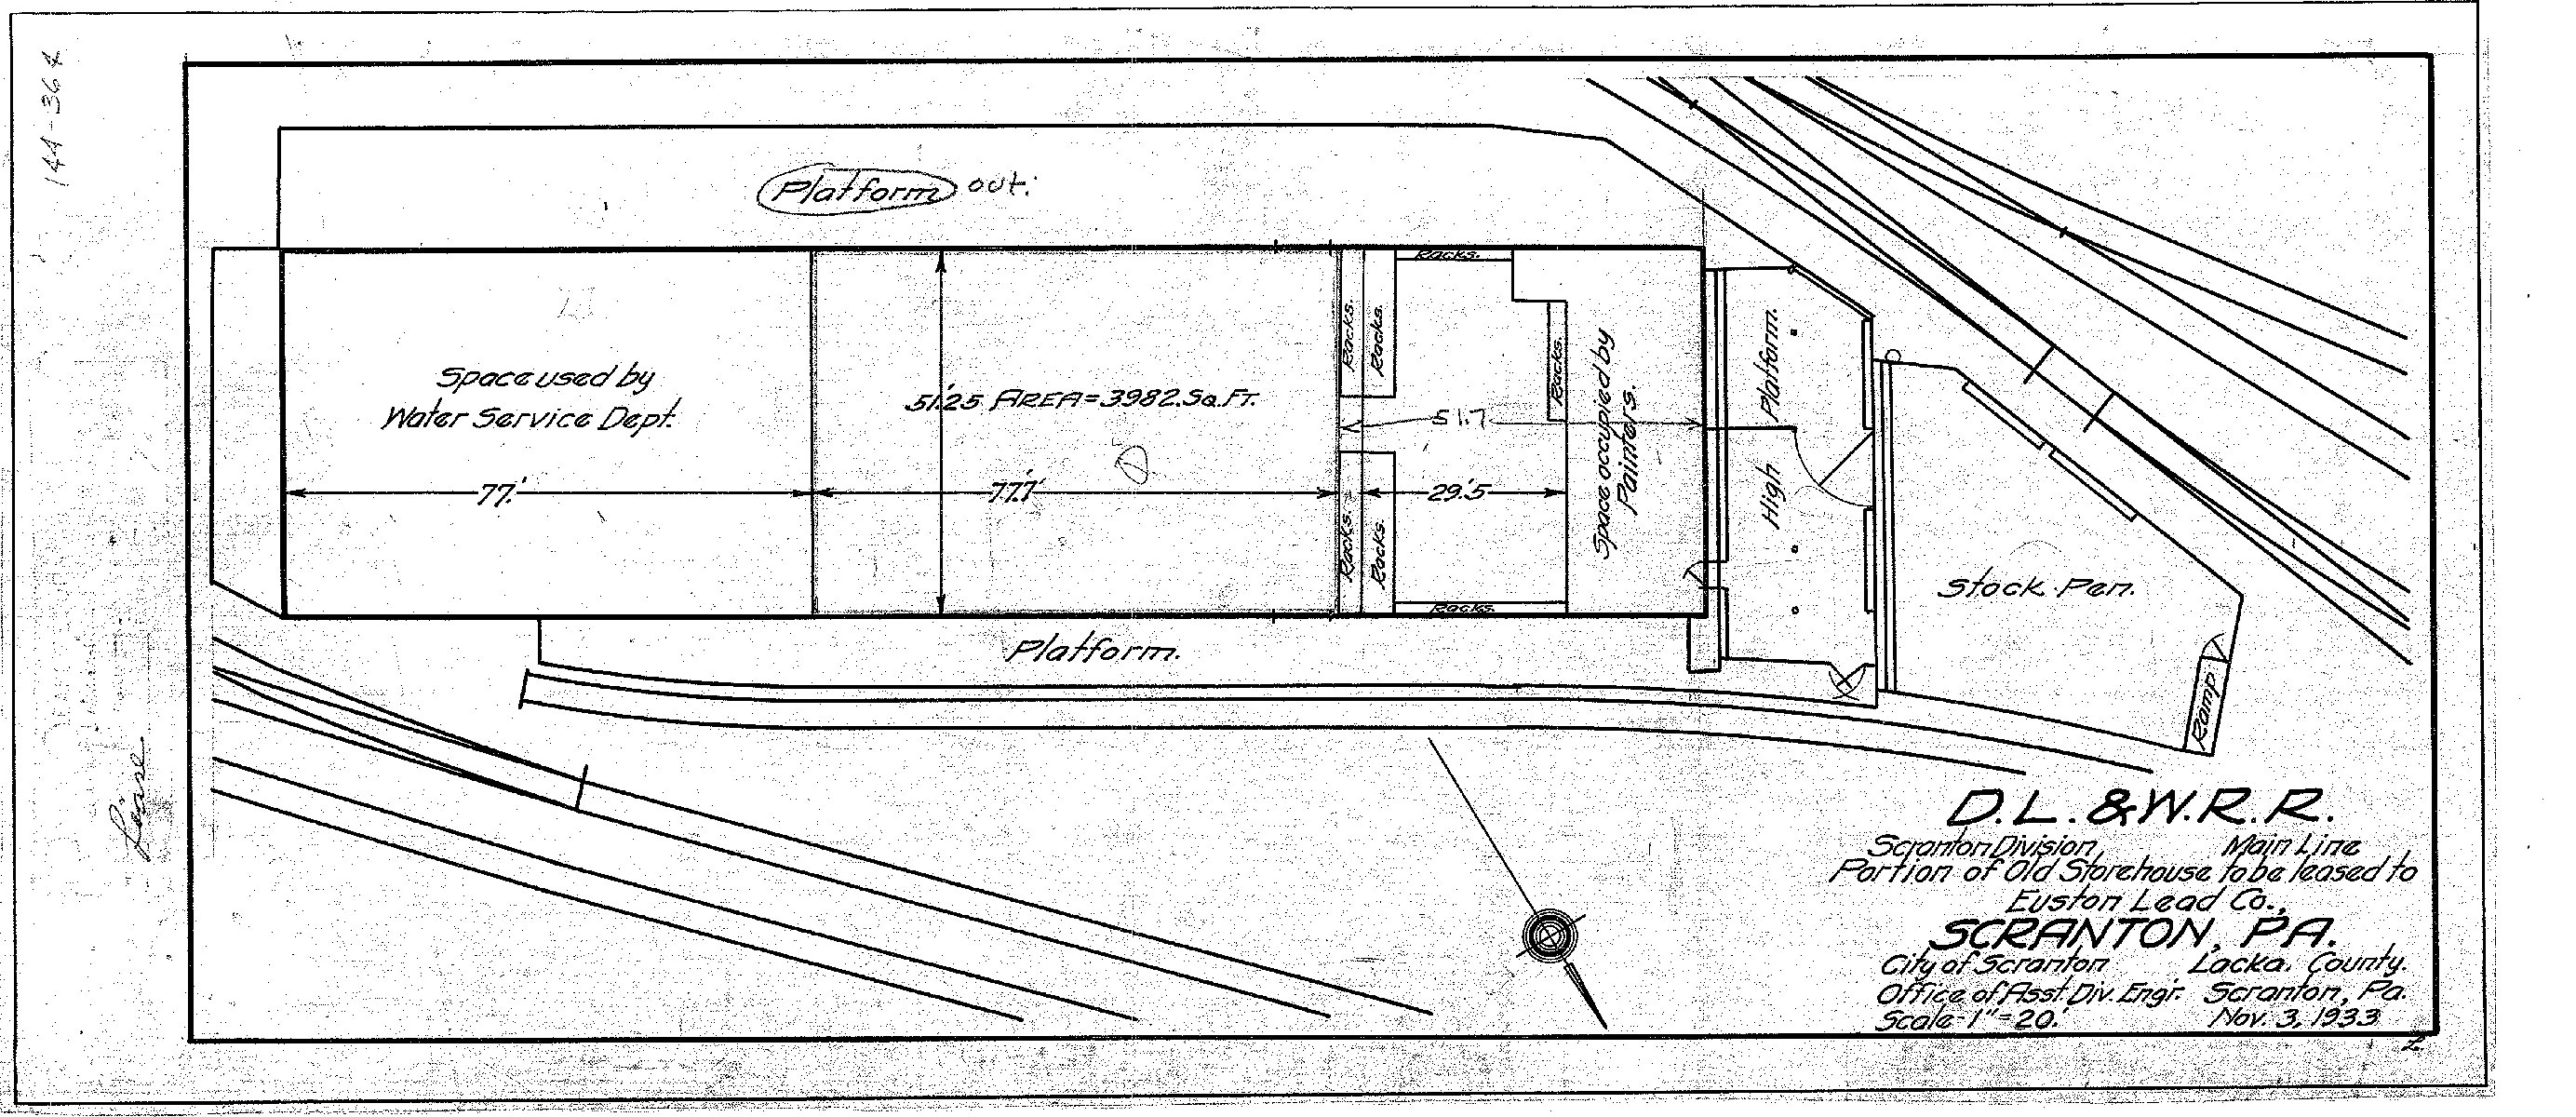 Delaware, Lackawanna, and Western Railroad, Portion of Old Storehouse to be leased to Euston Lead Co.